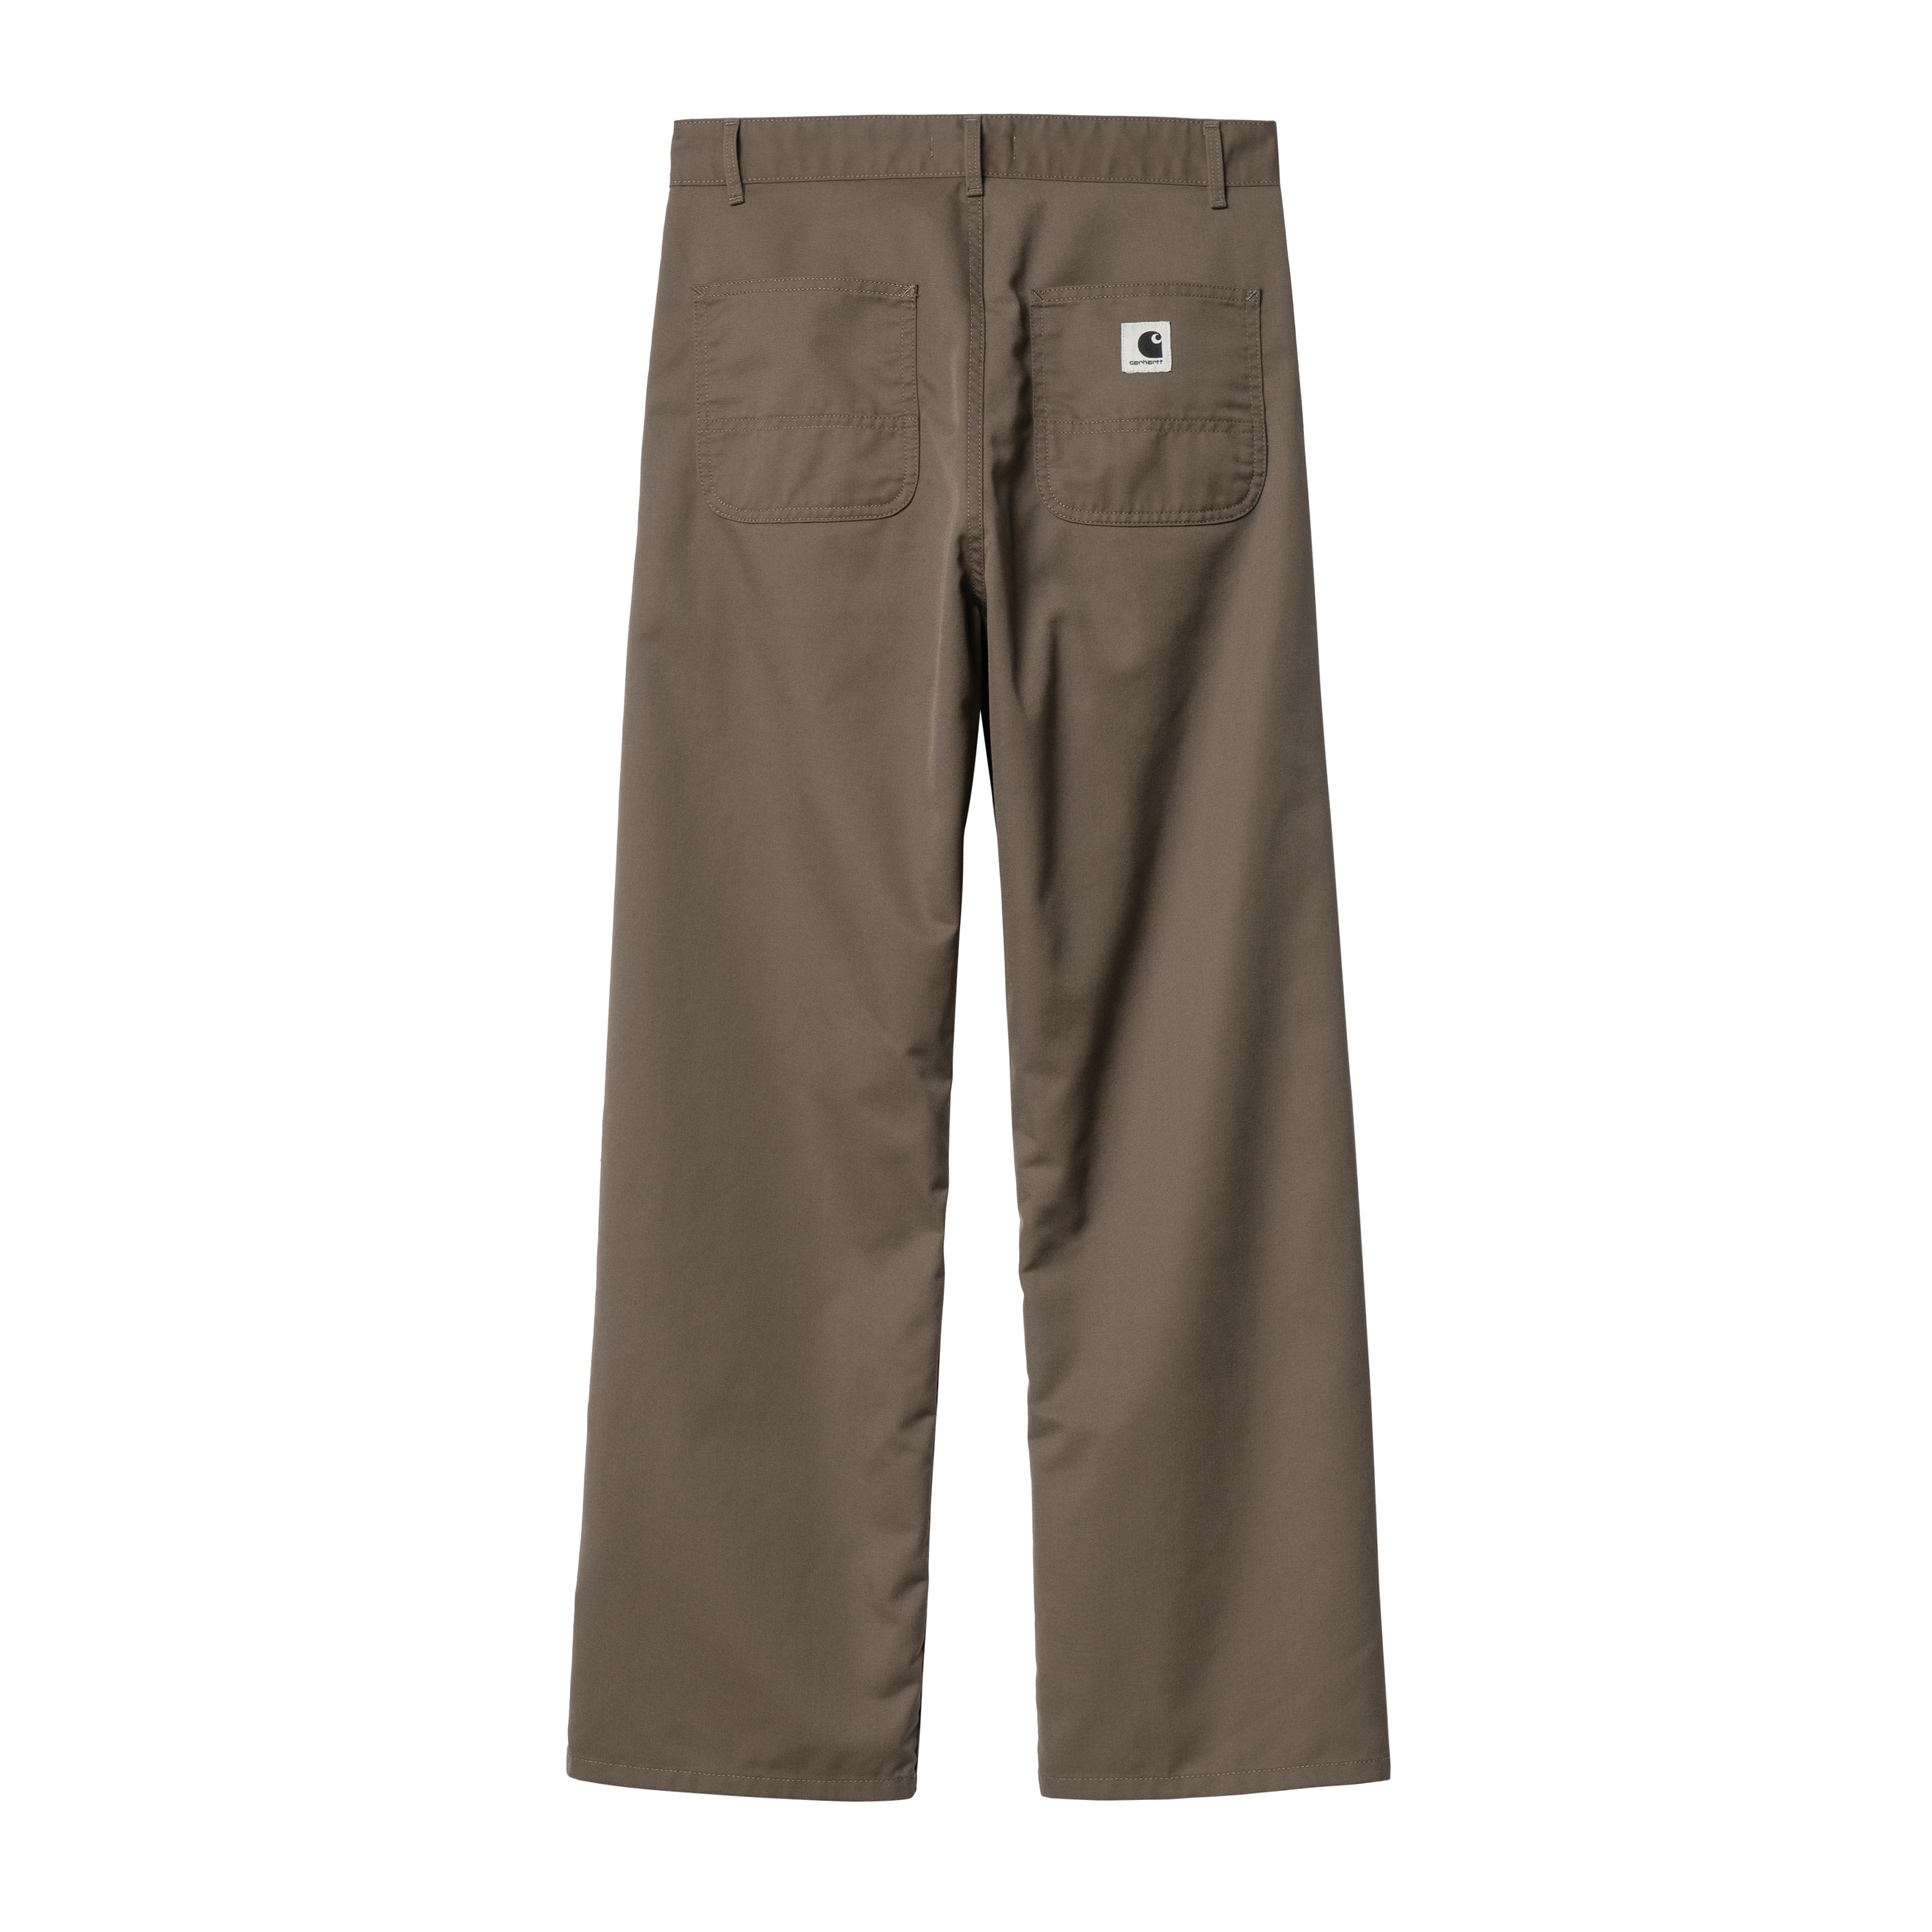 Carhartt WIP - W' Simple Pant in Barista Rinsed – stoy